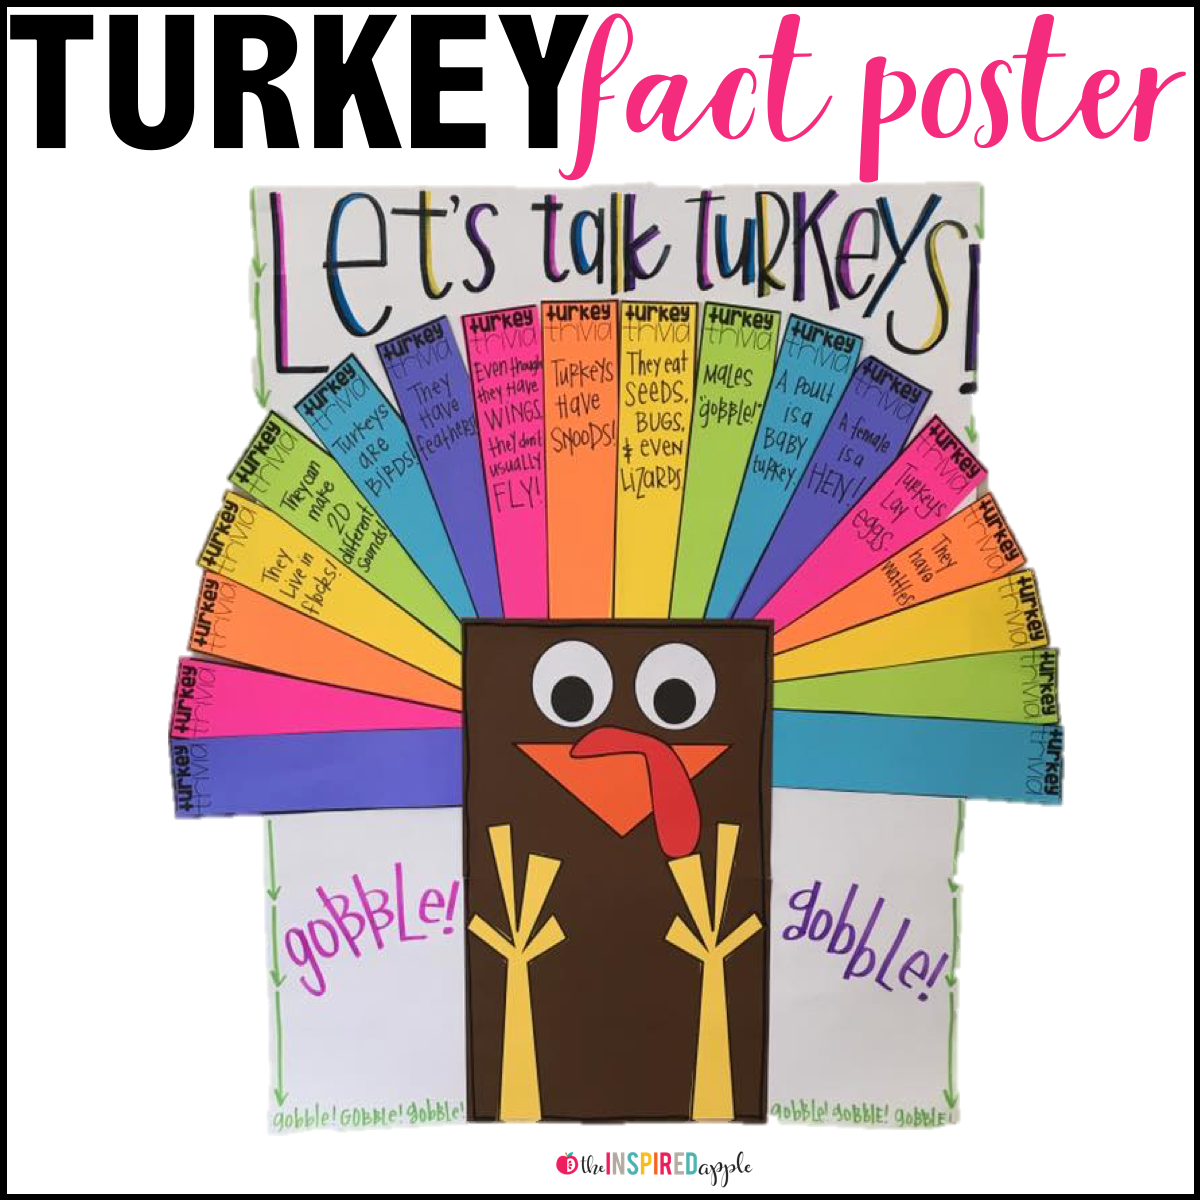 Check out this amazing post just full of turkey-themed activities that would work great in kindergarten, first grade, and second grade classrooms. They're the perfect way to incorporate science, math, and literacy into your Thanksgiving curriculum, while keeping your students engaged.